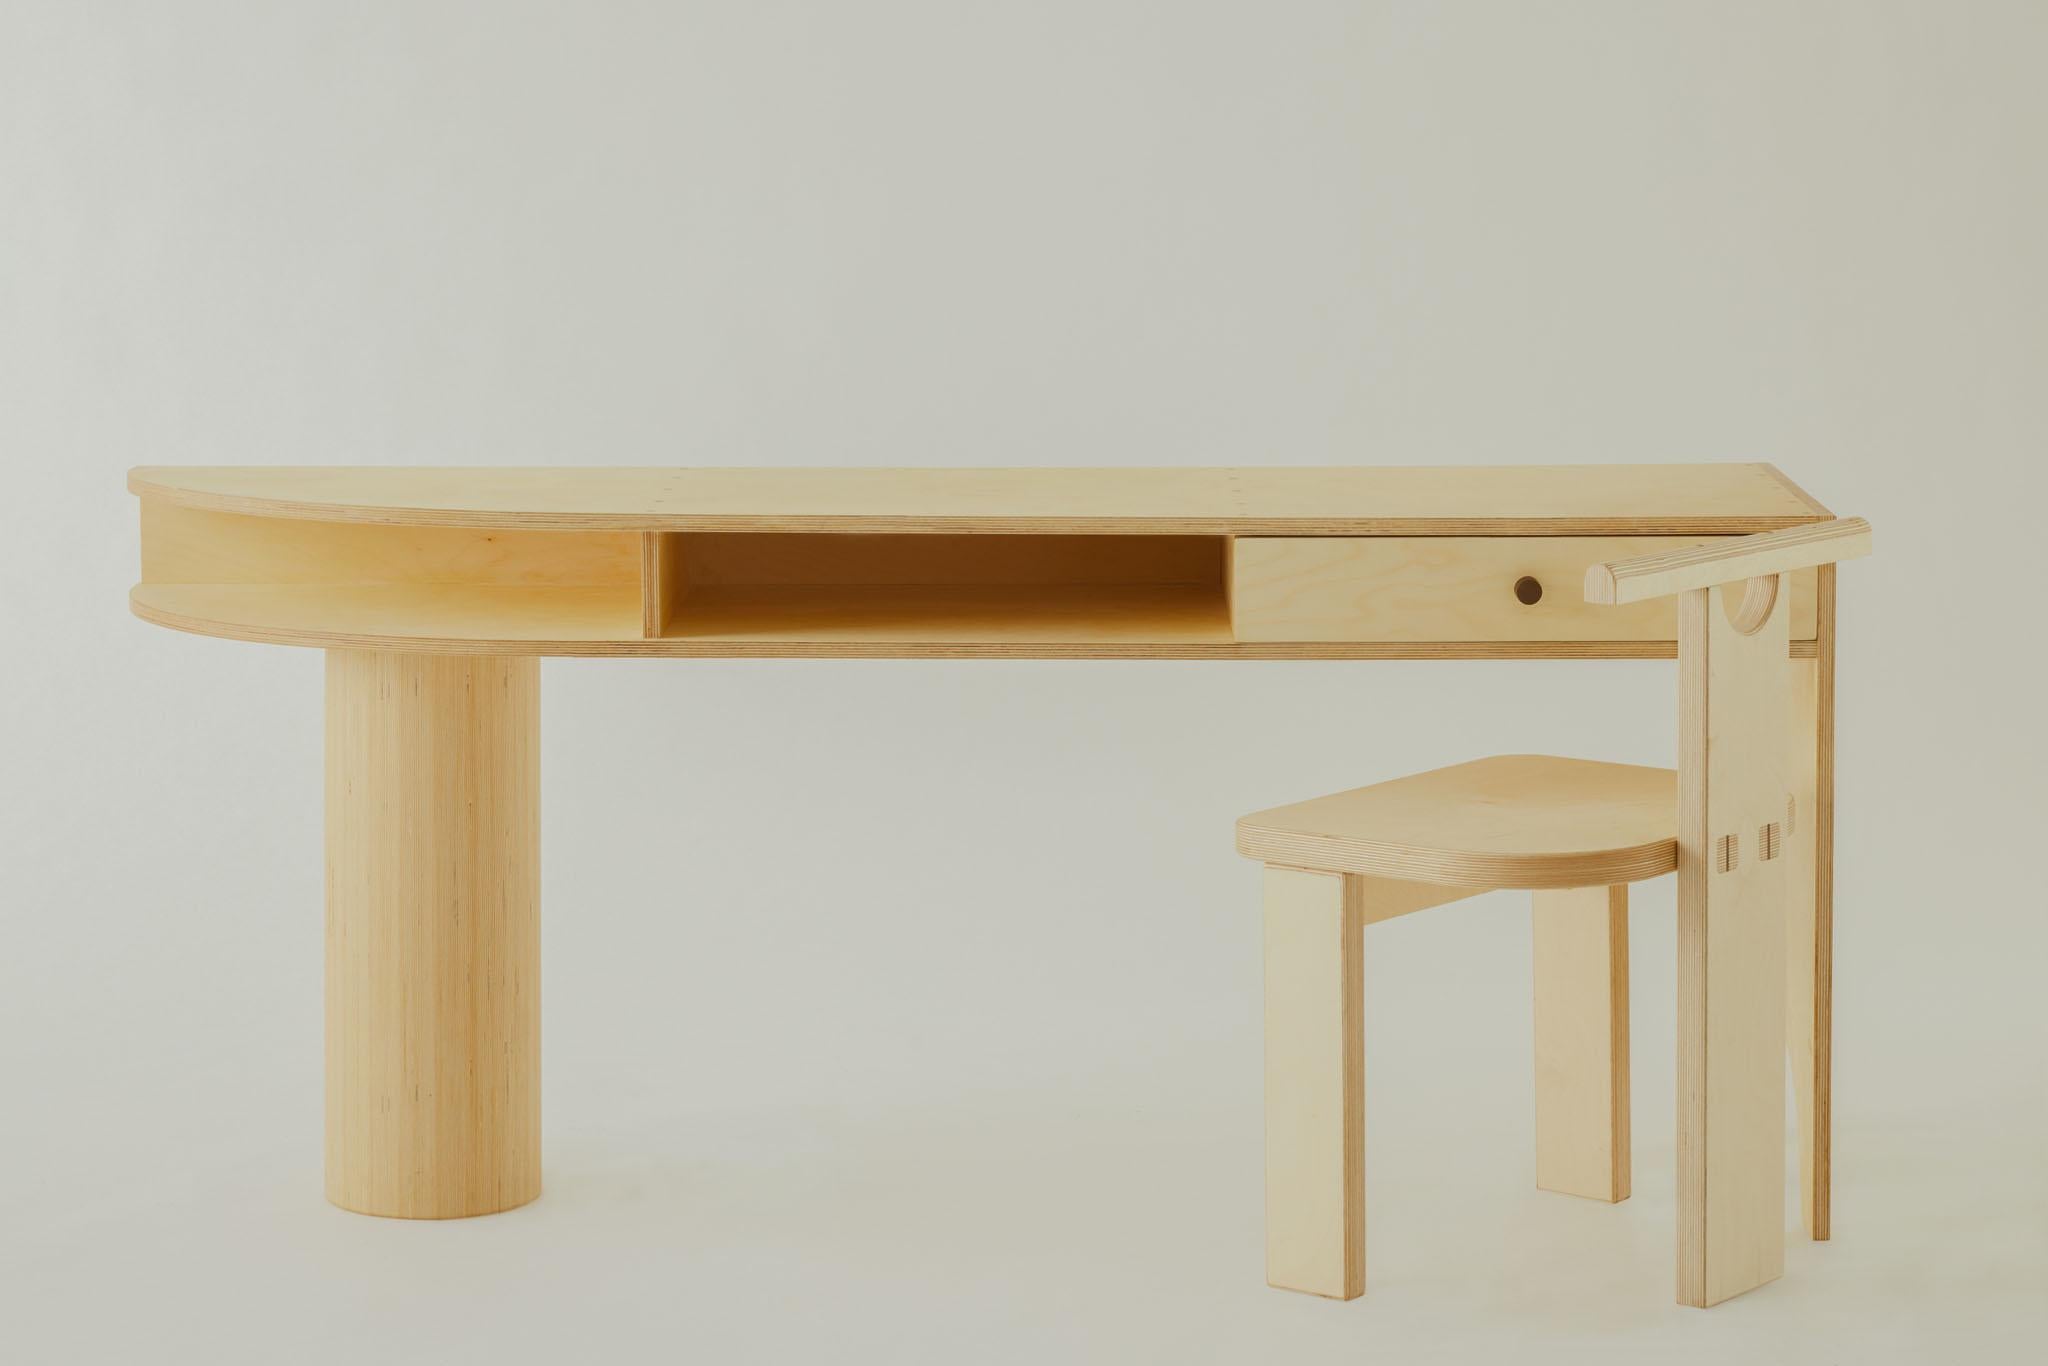 Distinguished by its sleek design and contemporary flair, this desk is a one stop shop for work or play. Asymmetrical elegance brings a dreamy union between function and form. The sensuous curve of the left supporting column highlights the simple